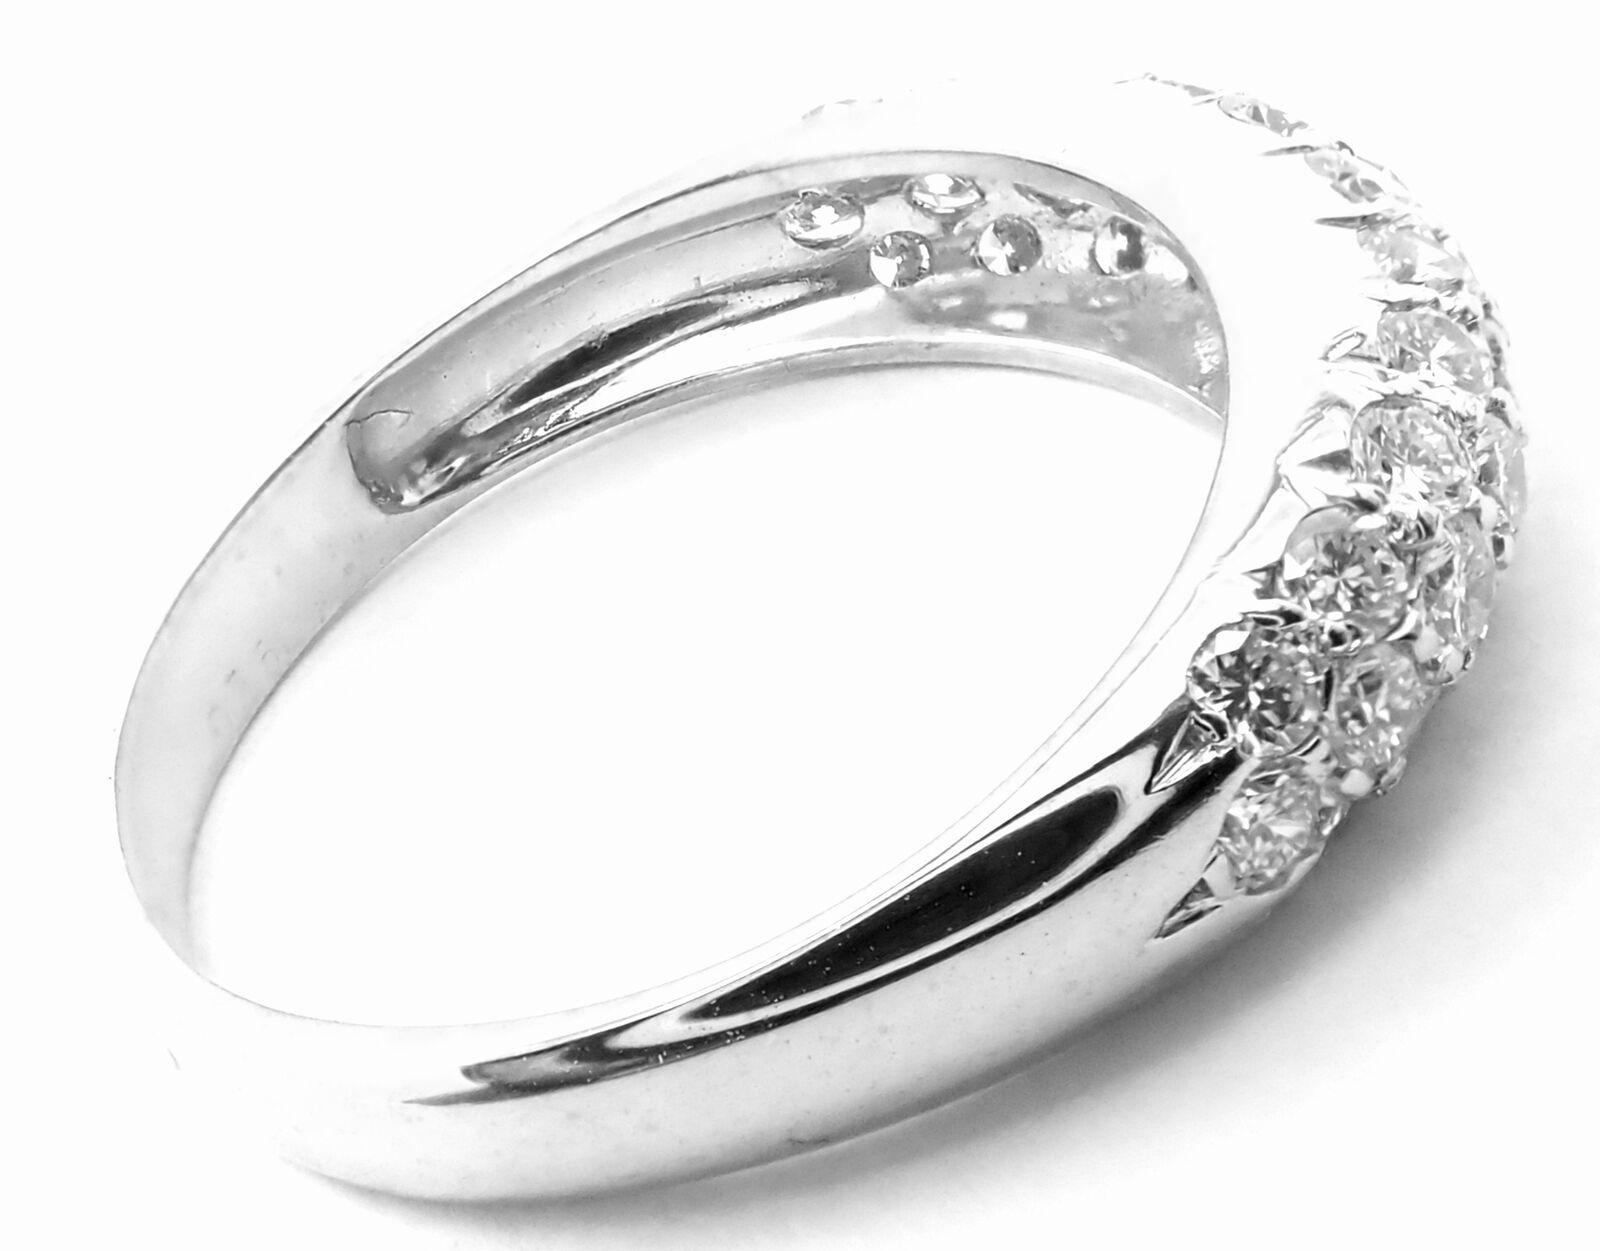 18k White Gold Diamond Band Ring by Van Cleef & Arpels.
With Round Brilliant cut diamonds VS1 clarity, G color total weight approximately  3.04ct
Details: 
Size: 5 3/4
Width: 5mm
Weight: 2.7 grams
Stamped Hallmarks: VCA 18k B533XXX(serial number has